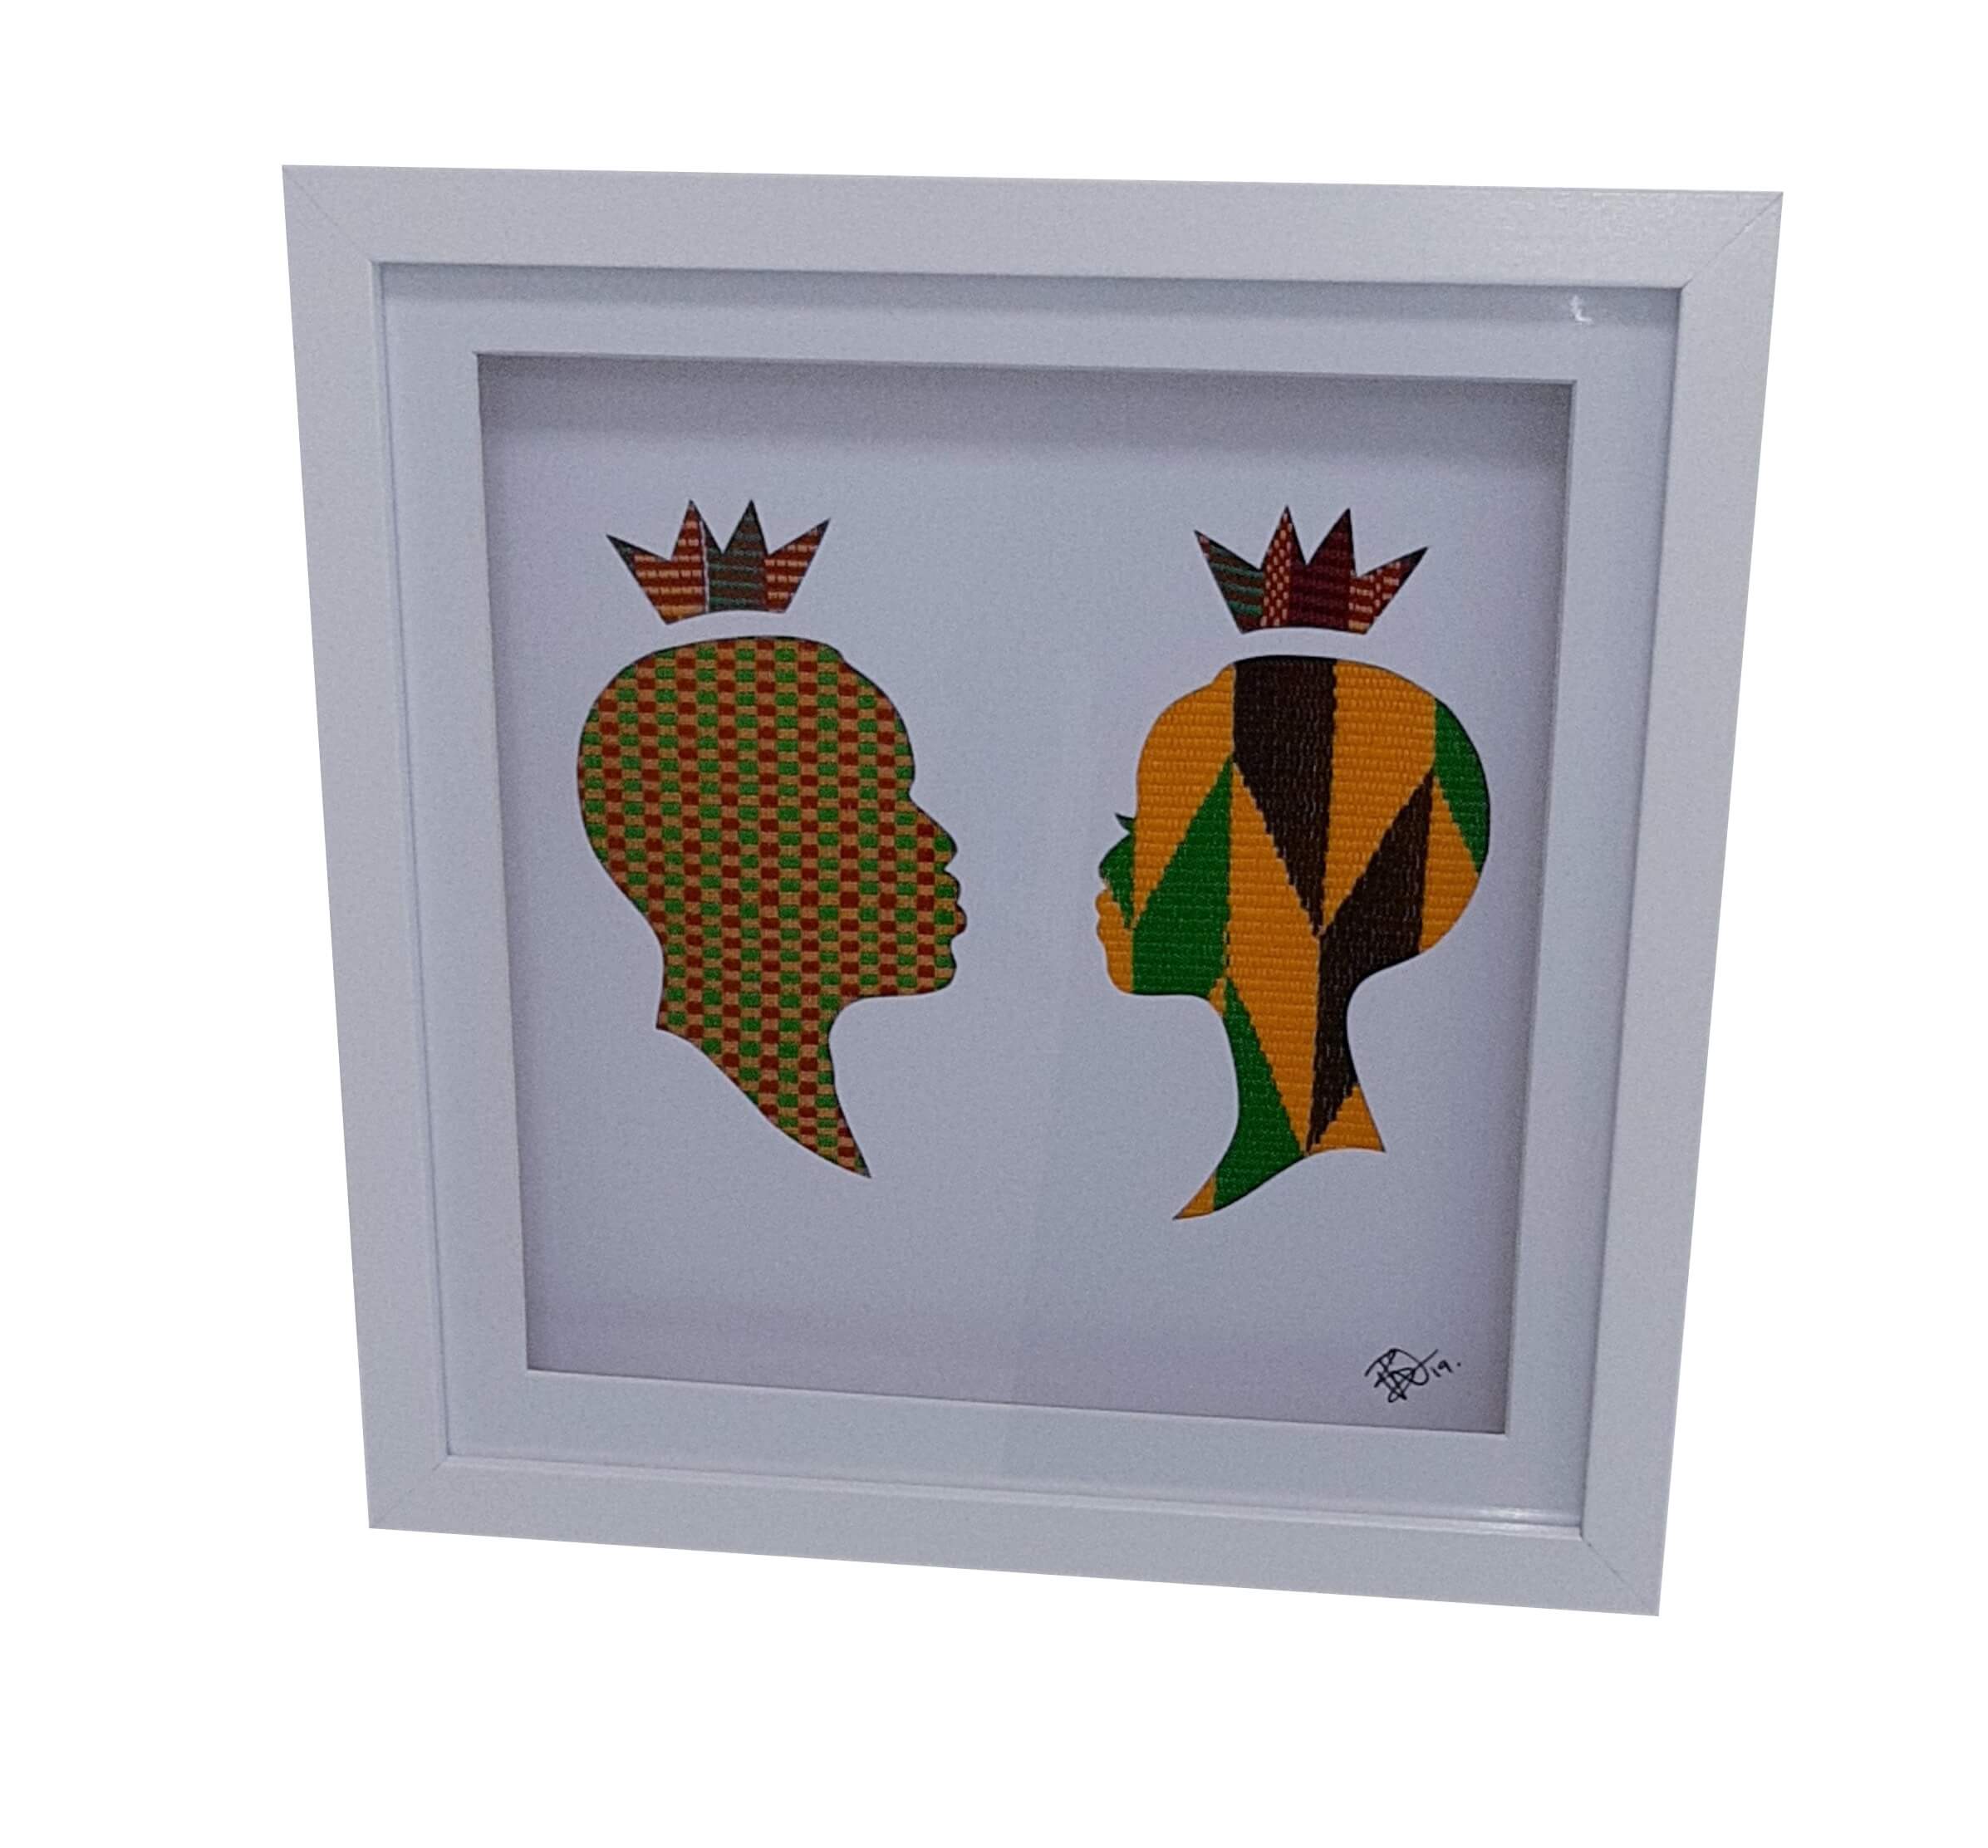 Fabric of Africa Frames